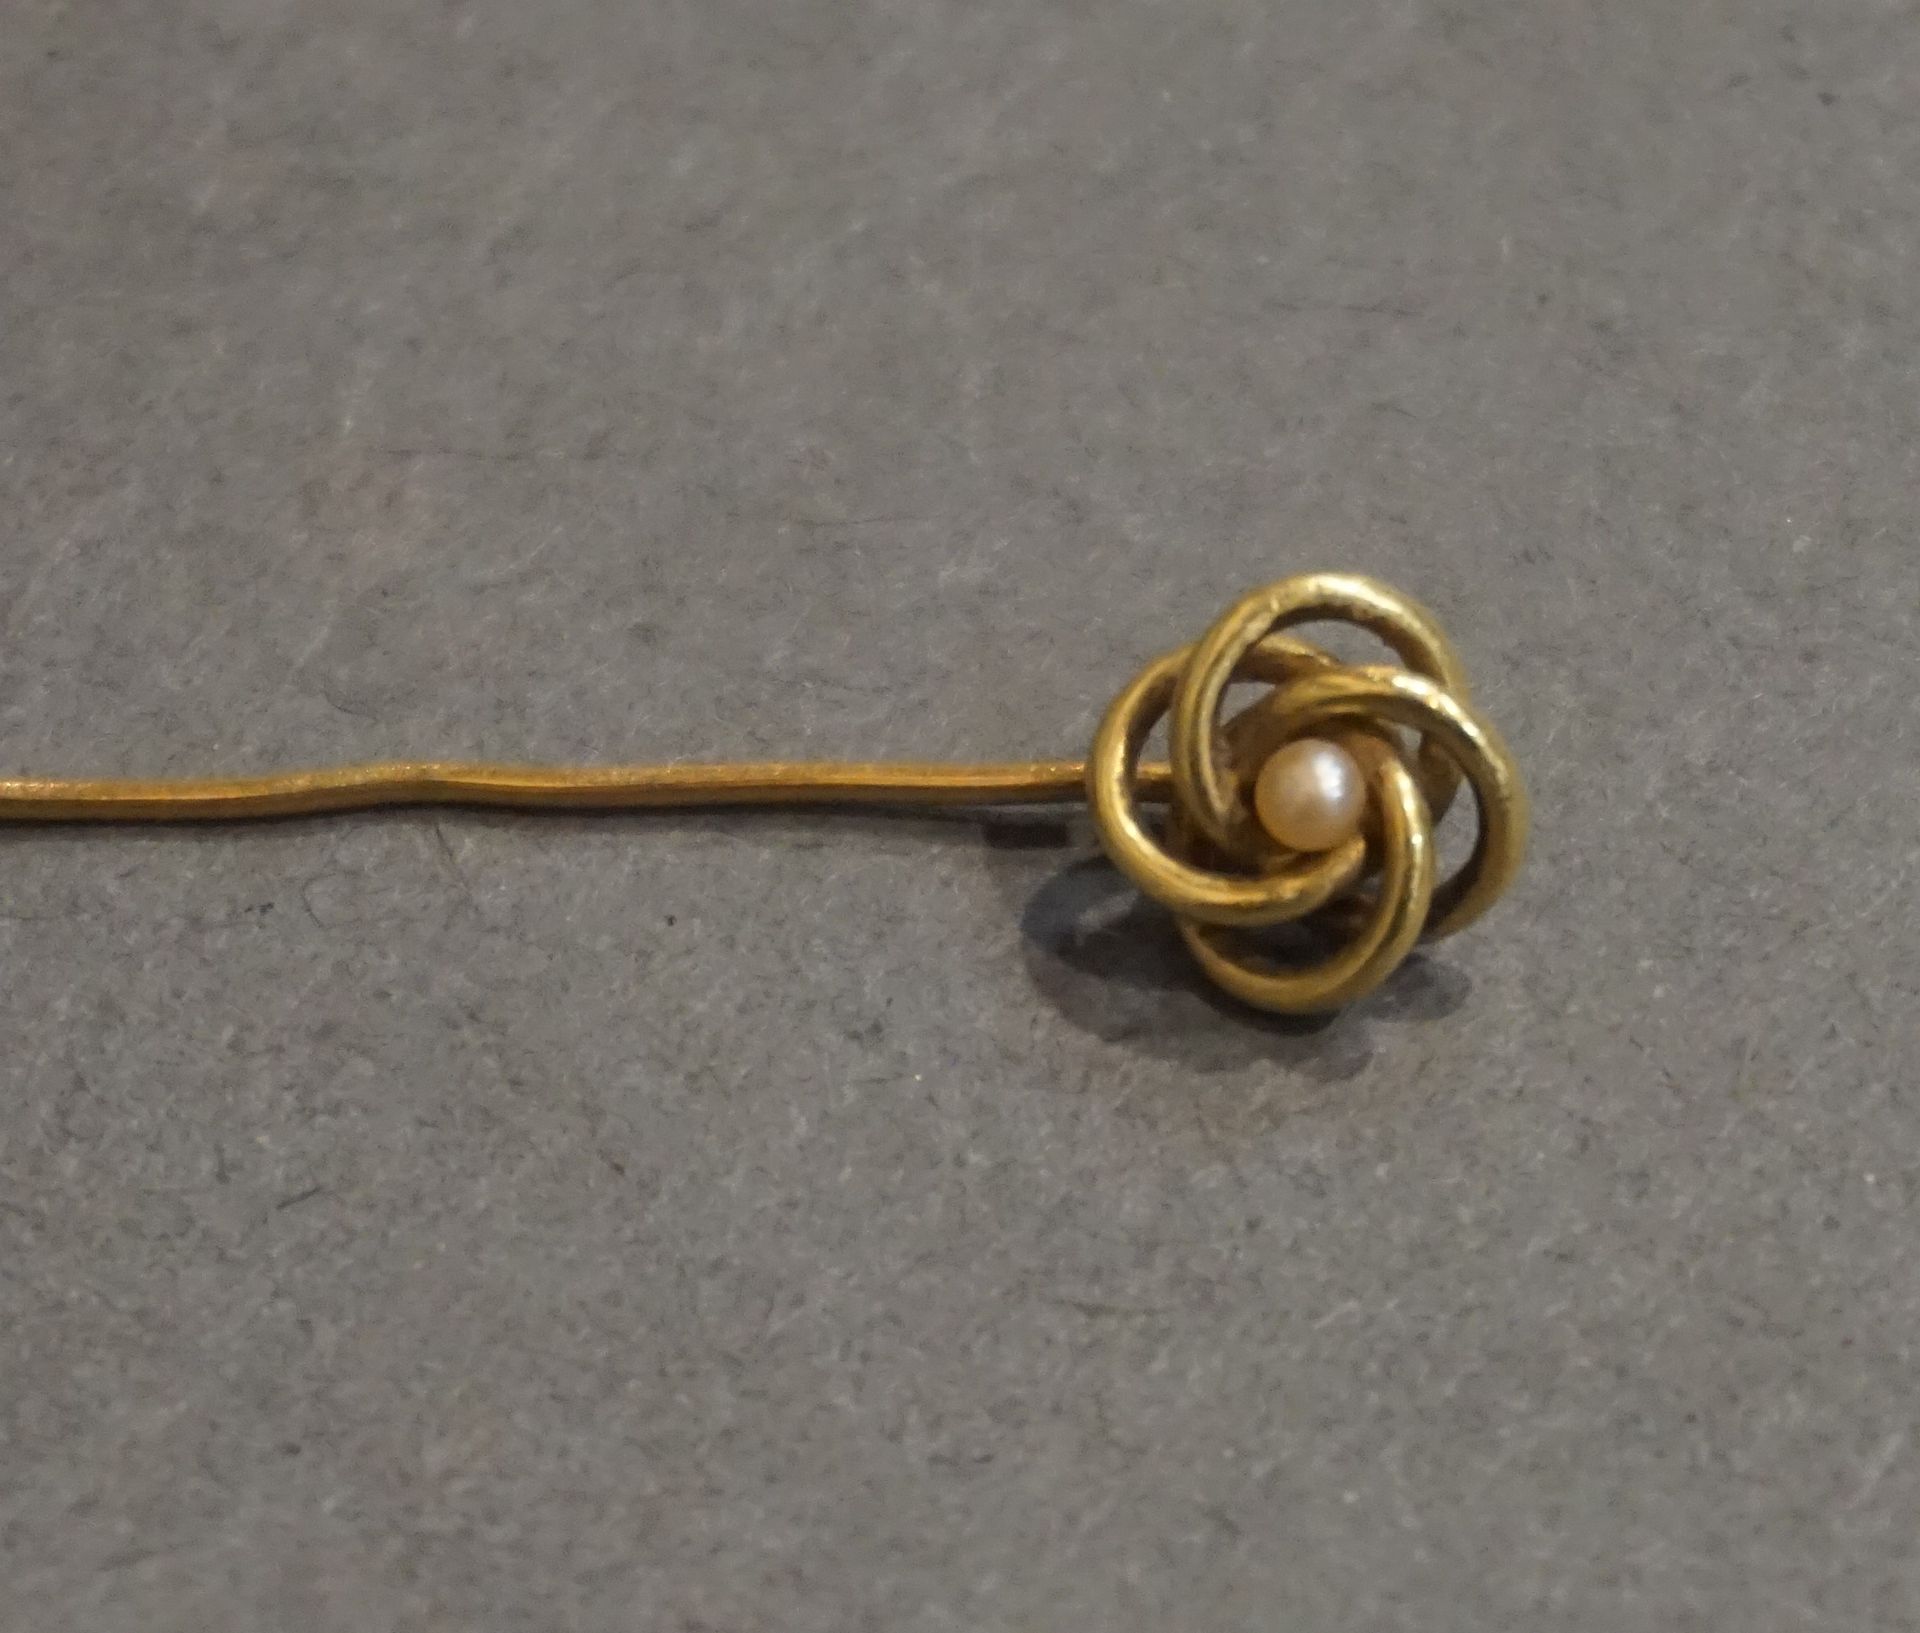 Epingle Gold pin with a scroll motif set with a pearl (1 gr)